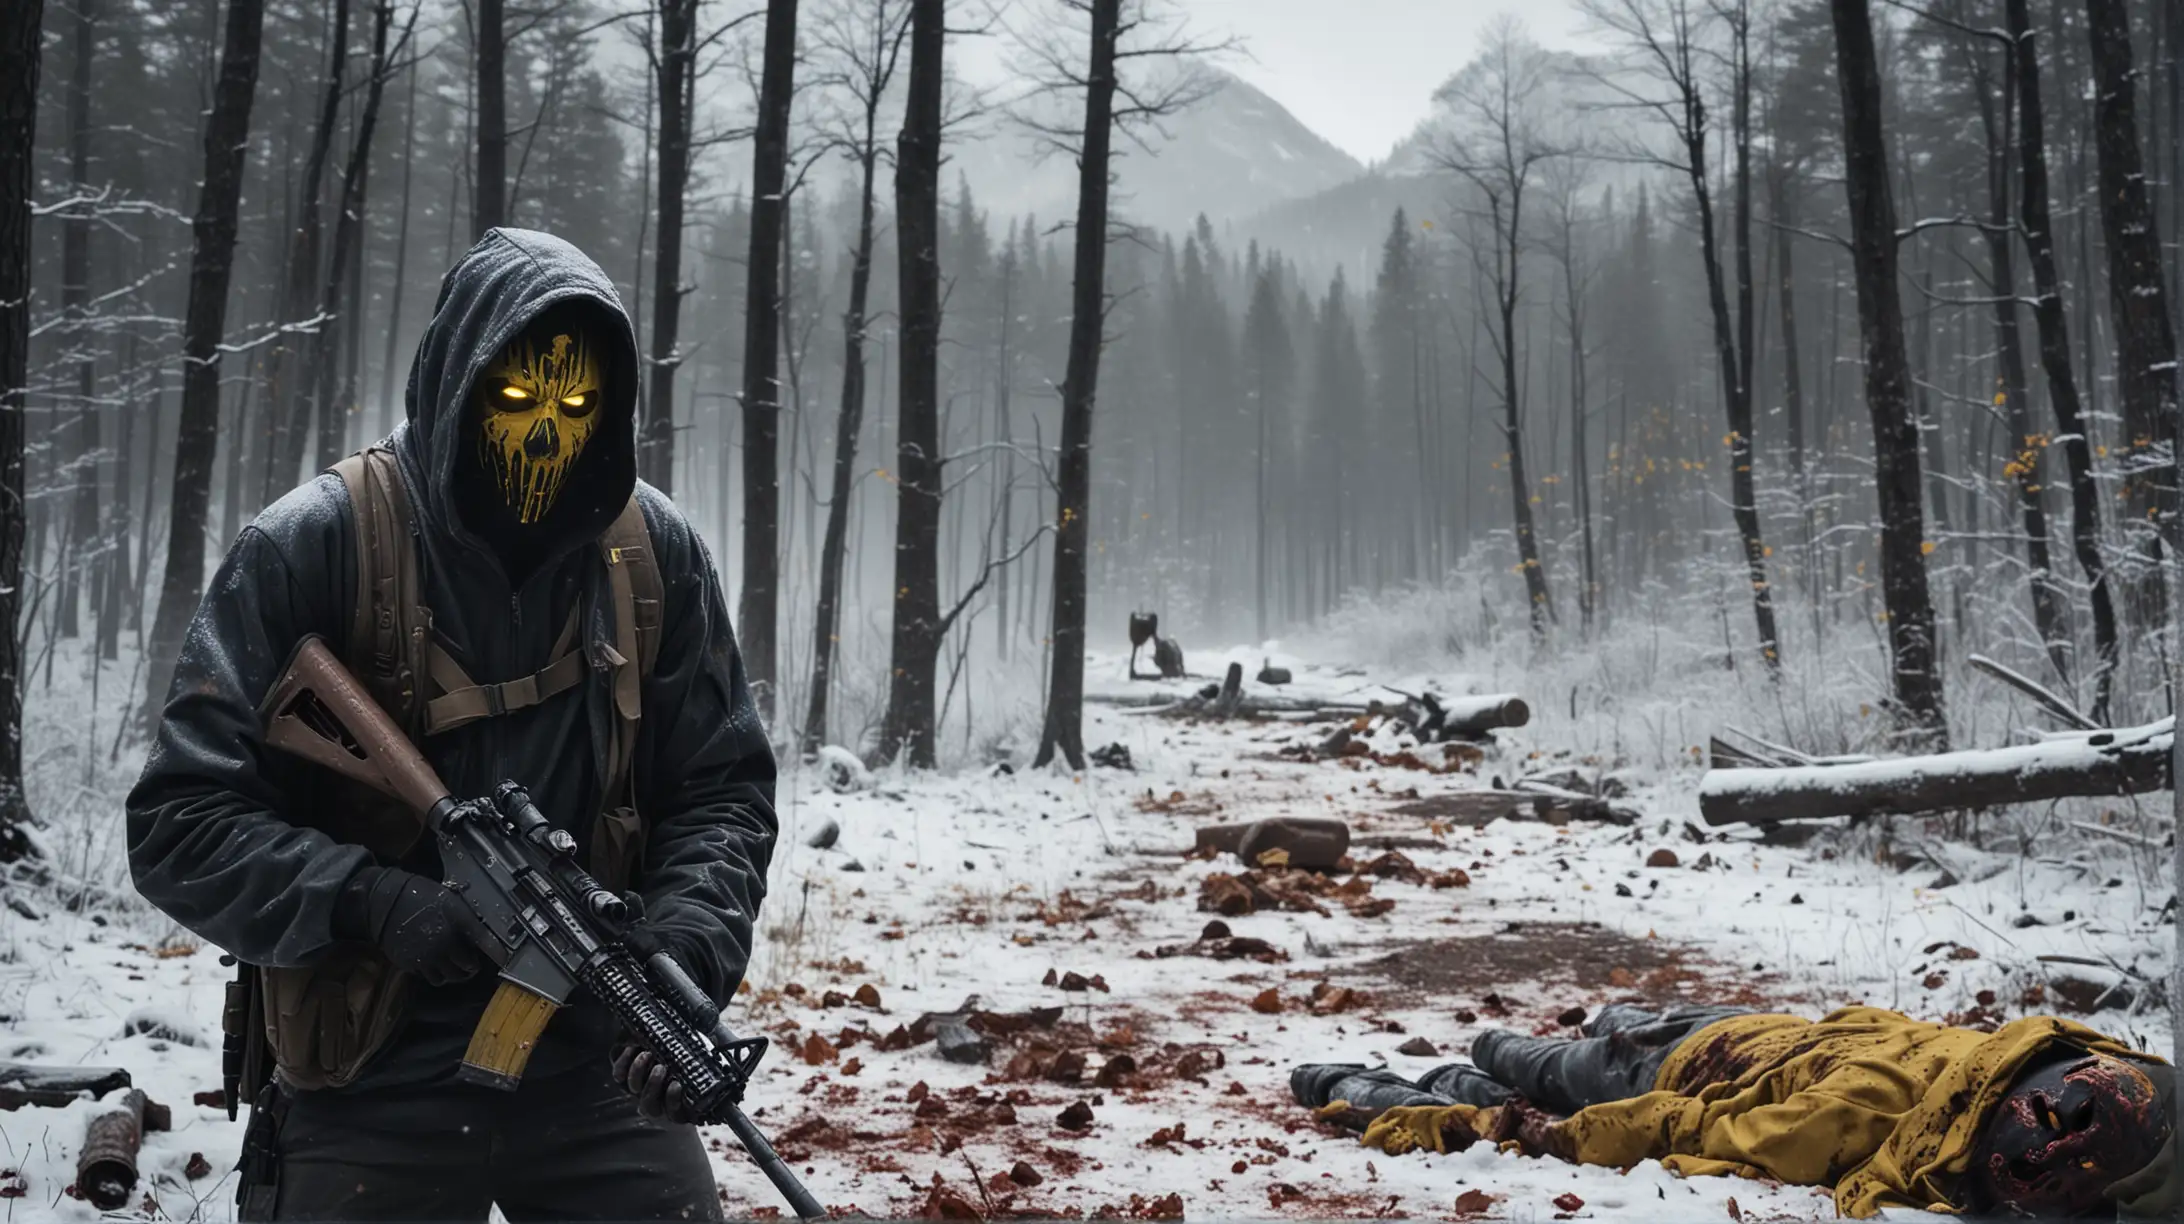 Hooded Figure with Rifle Facing Mysterious Creature in Snowy Wilderness